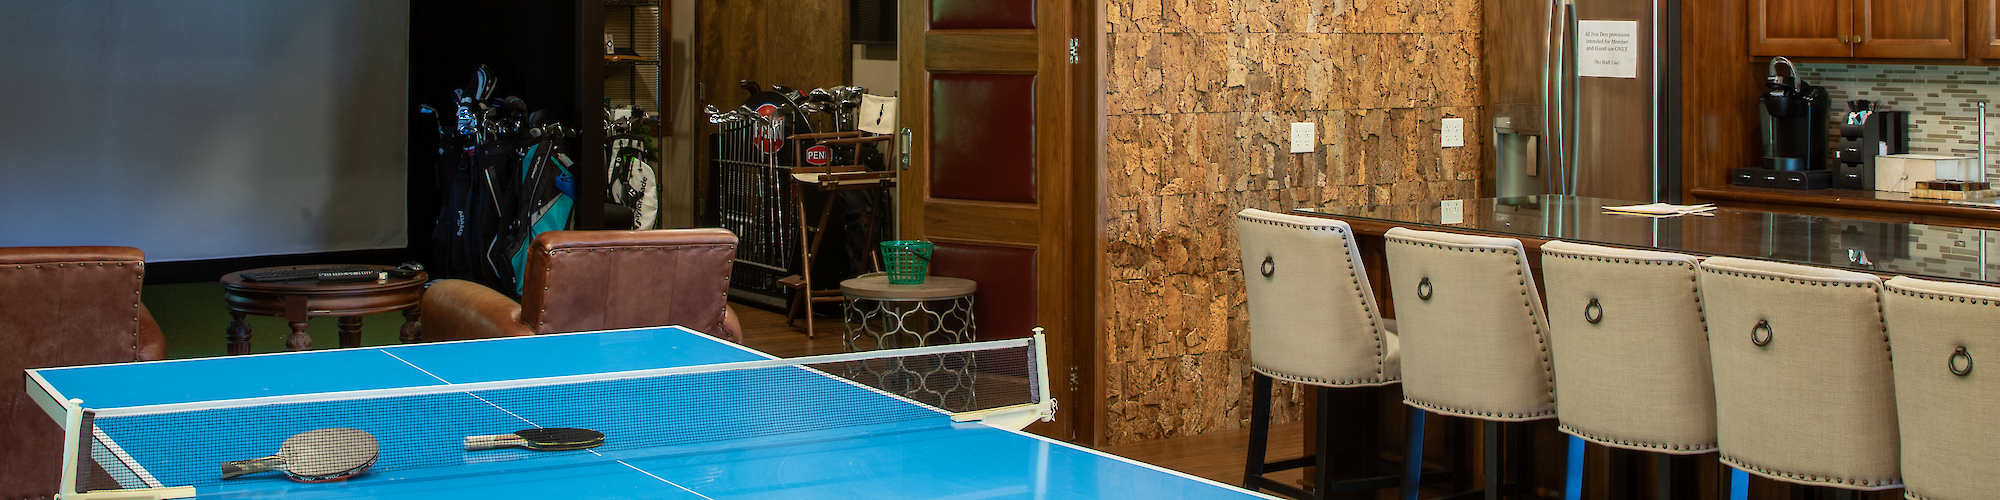 Versatile game and meeting space in Fox Den with a ping pong table at Preserve Resort & Spa event venue.